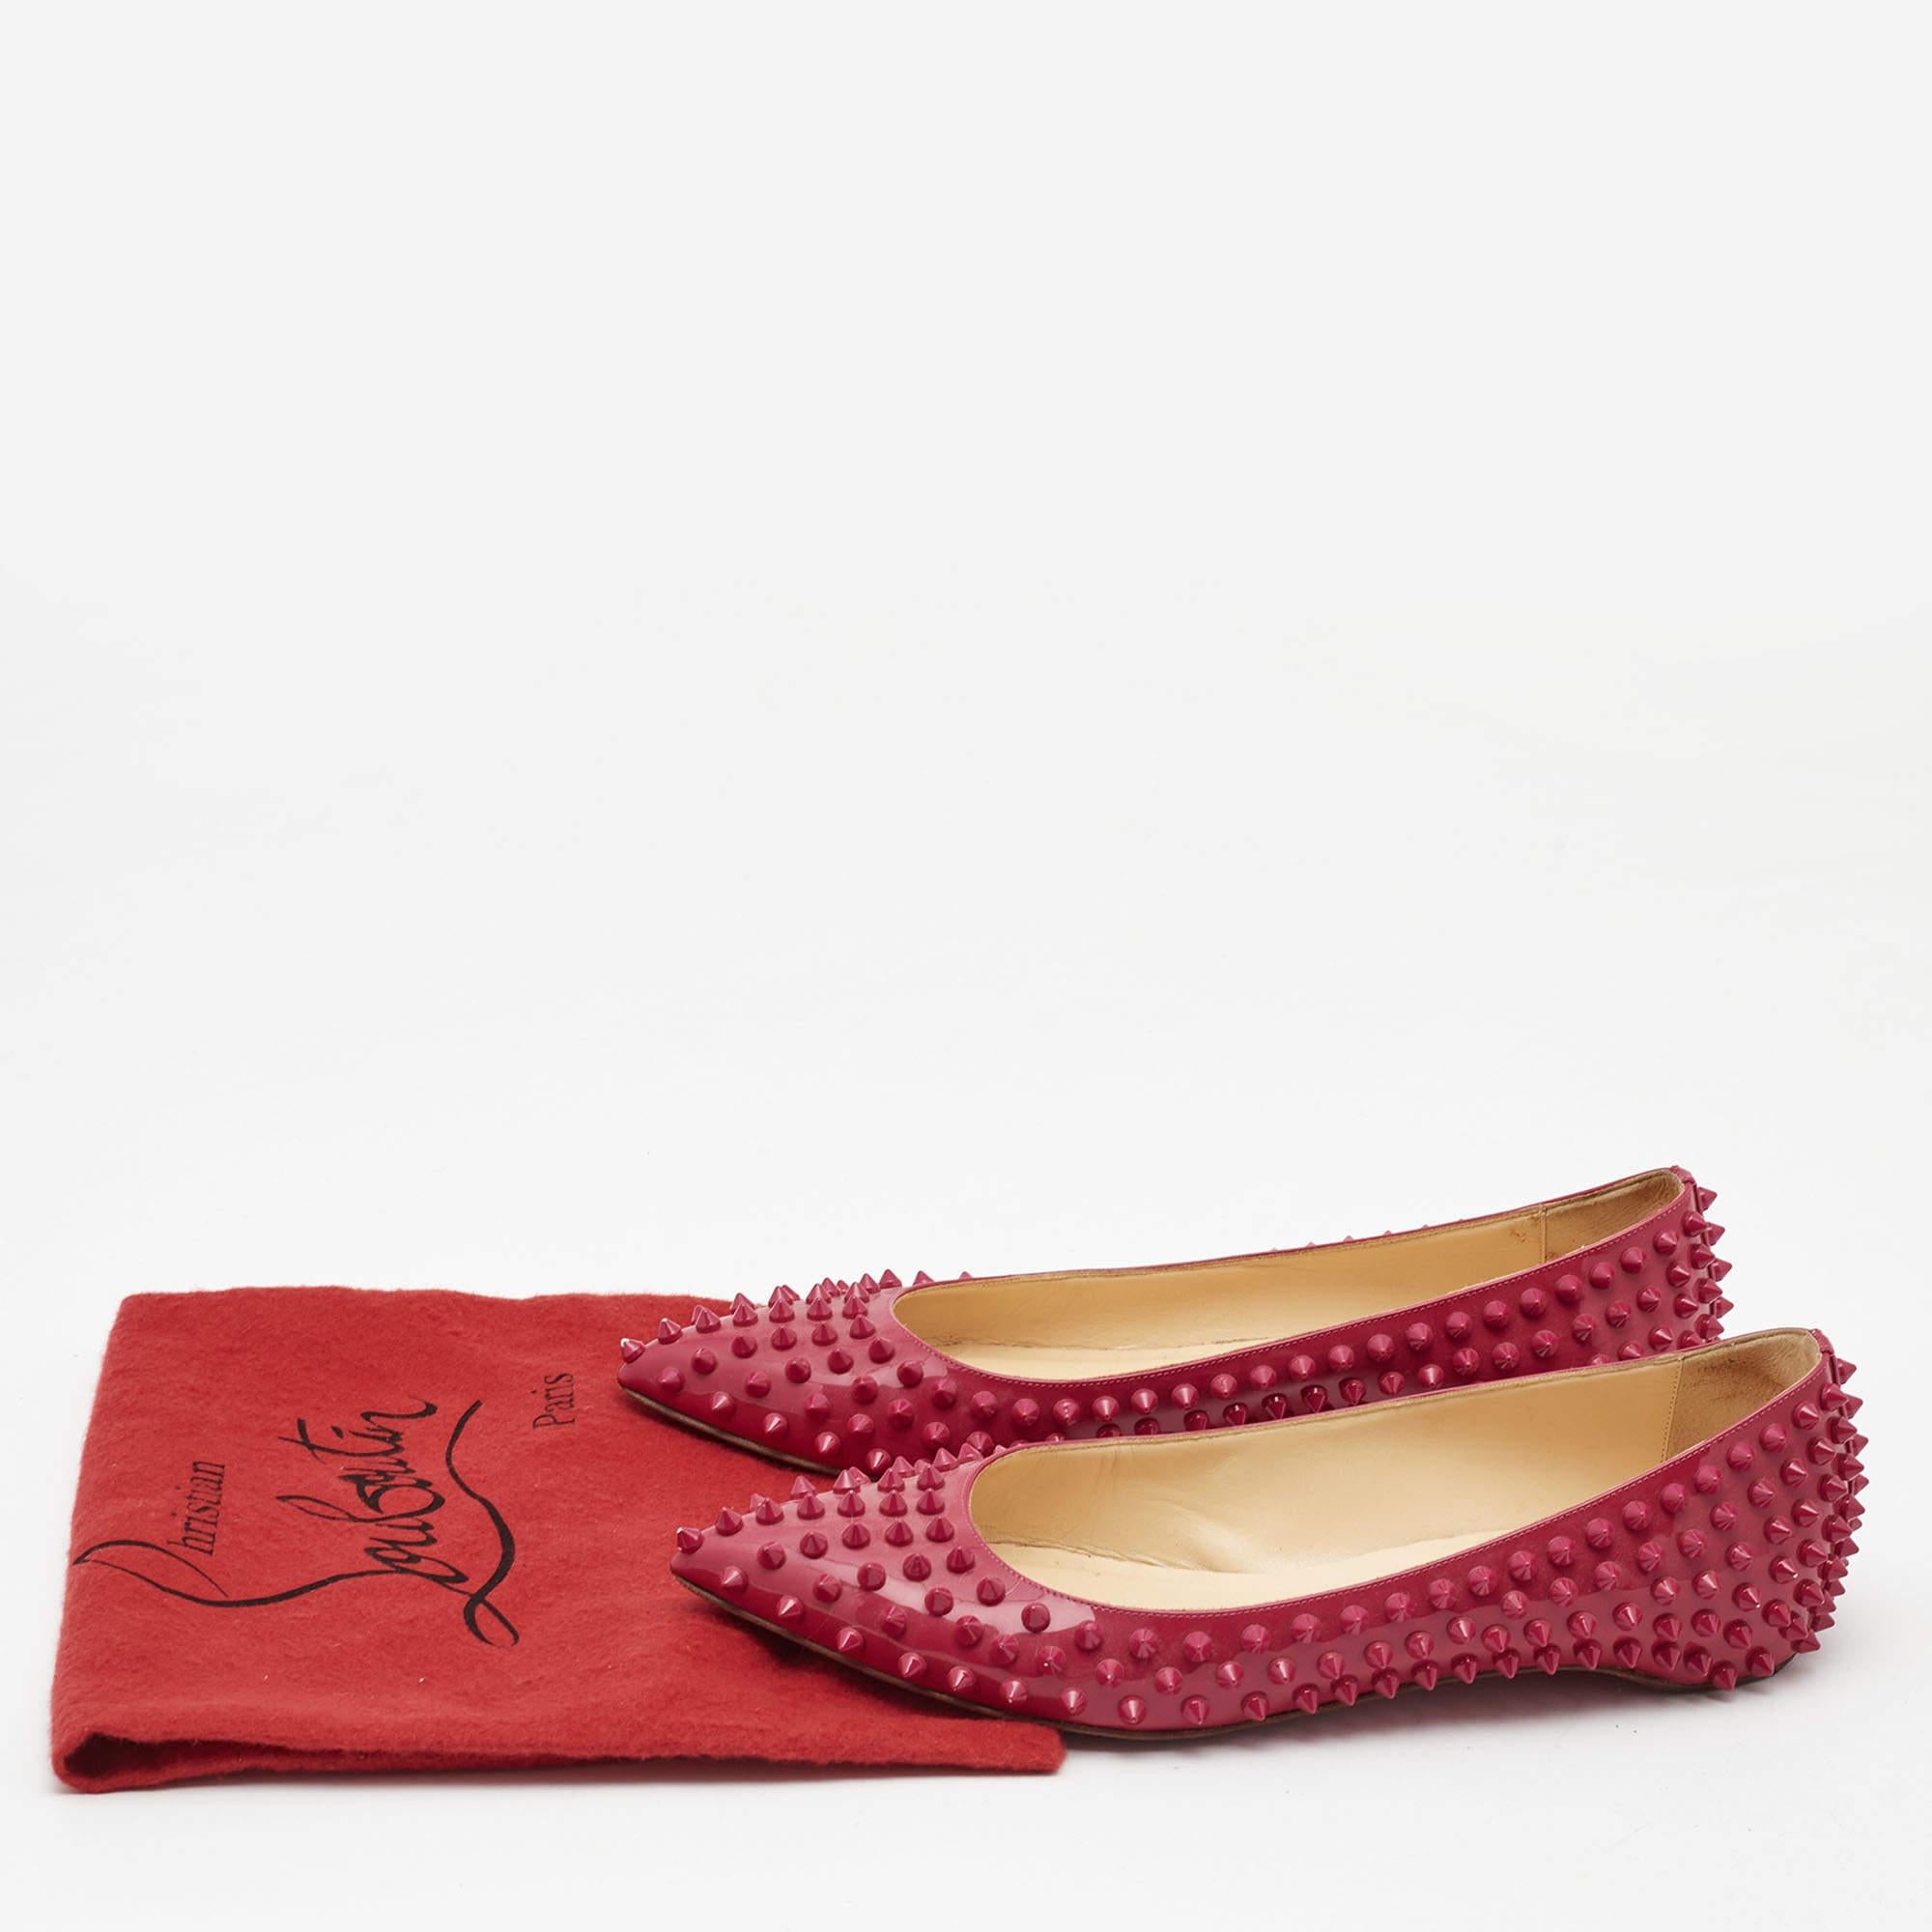 Christian Louboutin Pink Patent Leather Pigalle Spikes Ballet Flats Size 39 3